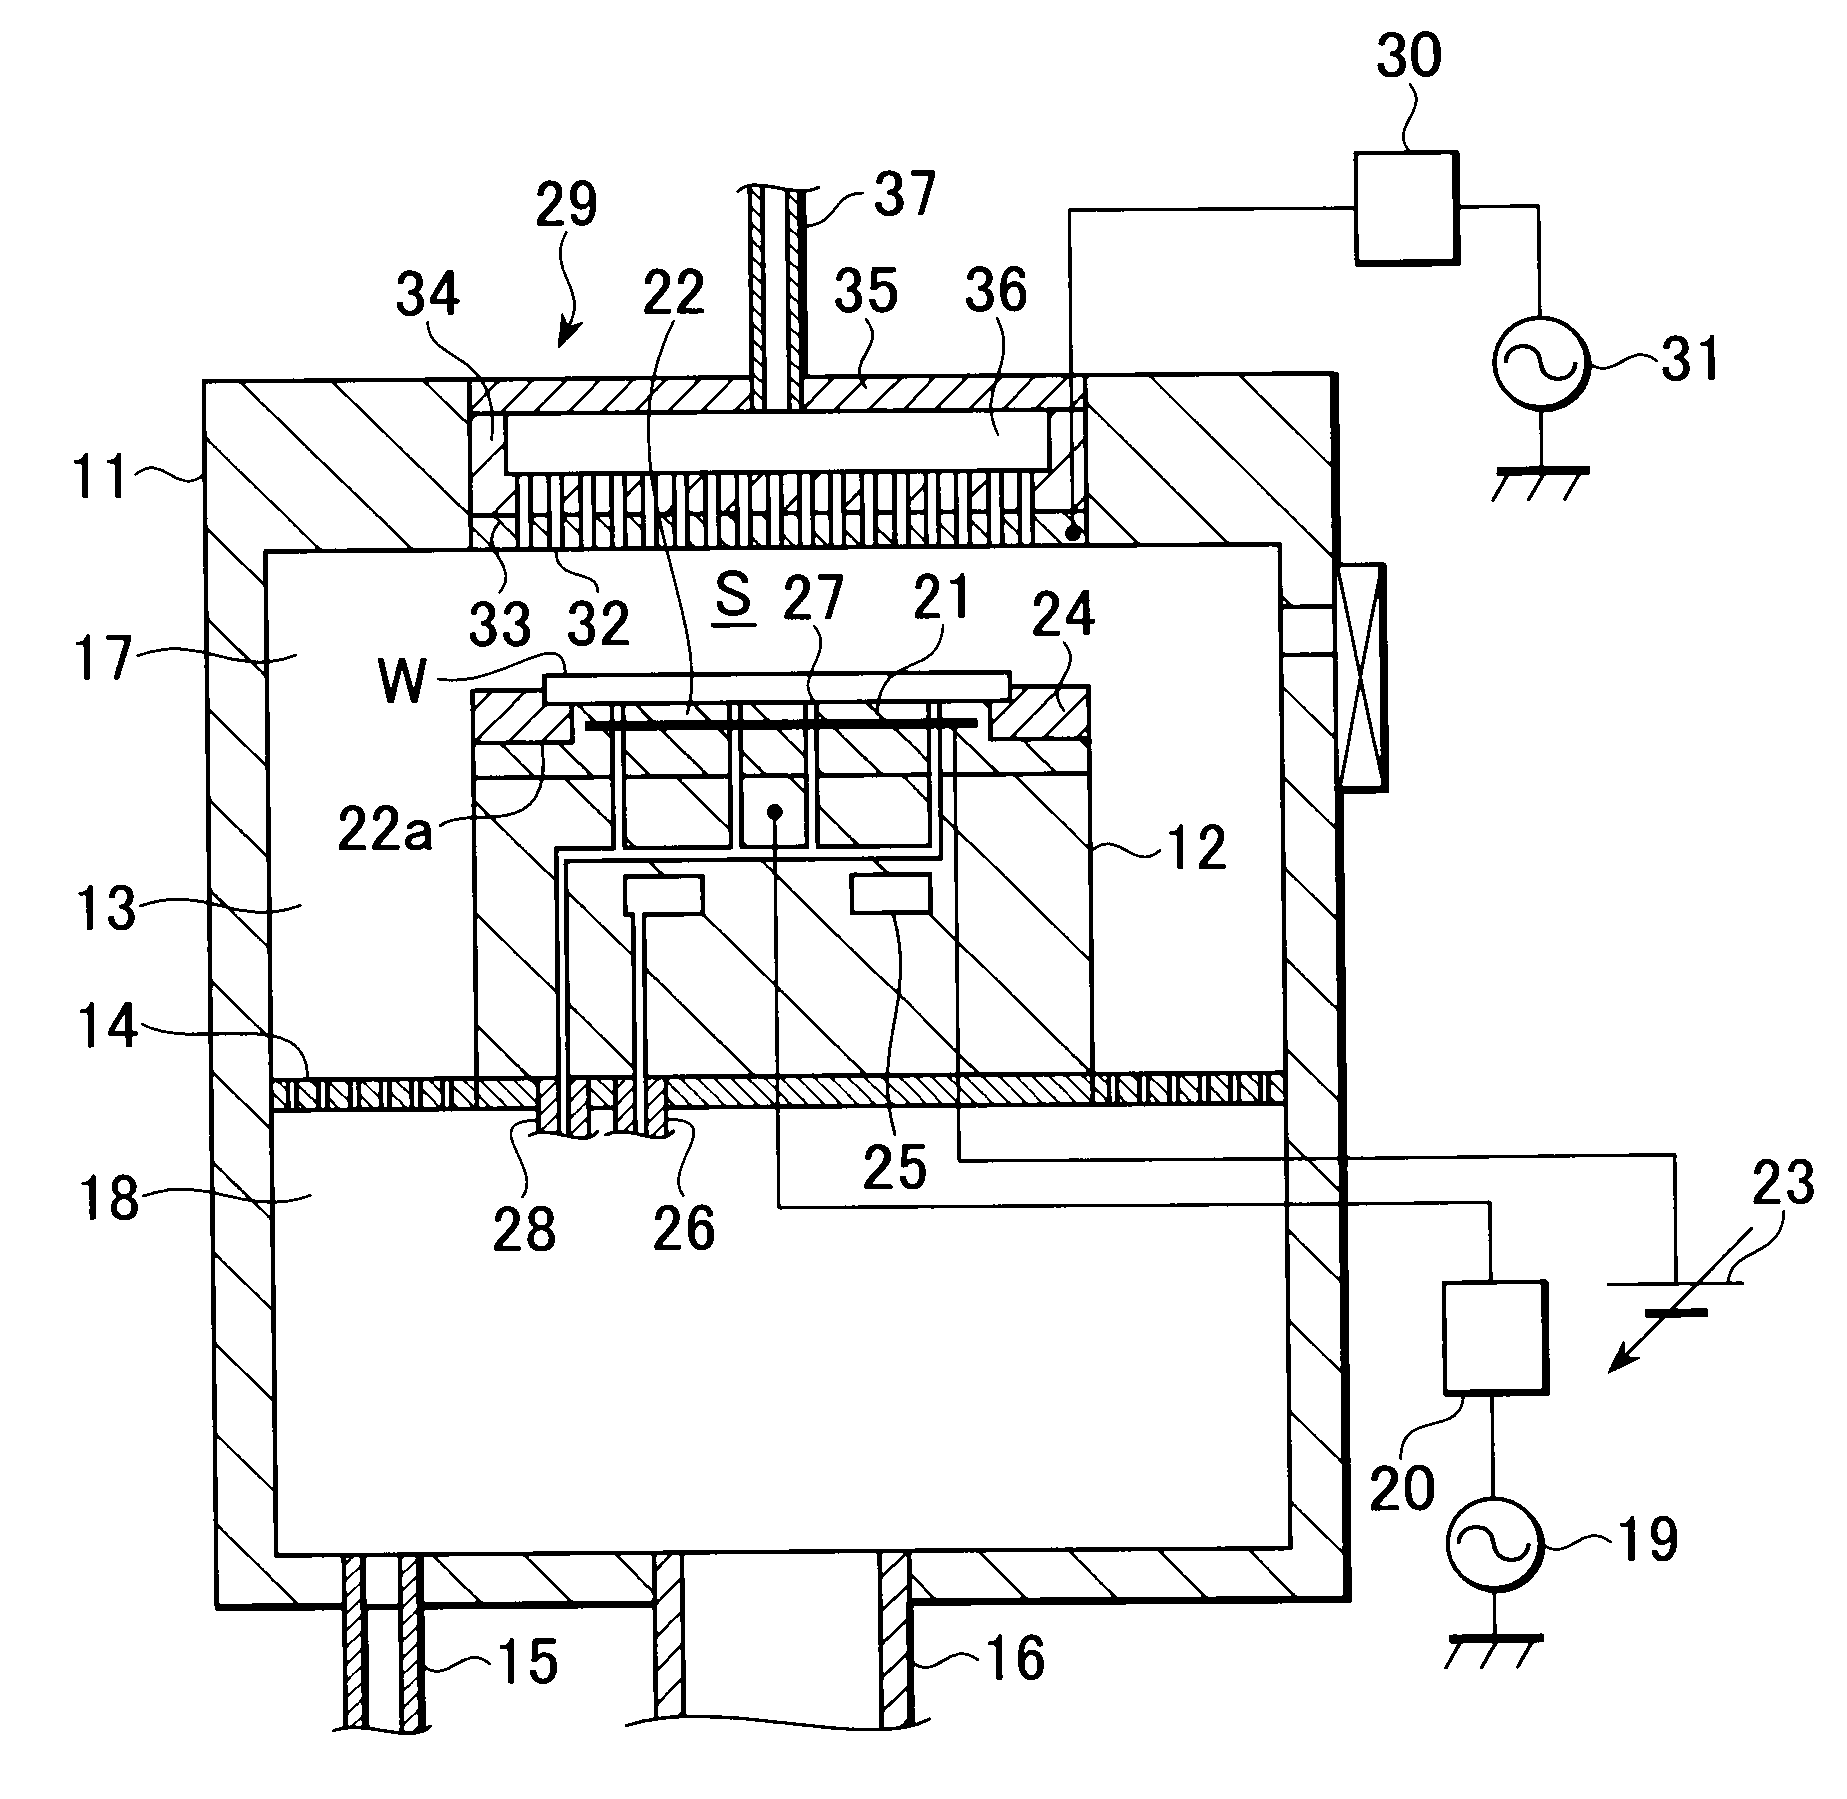 Substrate processing apparatus and substrate mounting stage on which focus ring is mounted